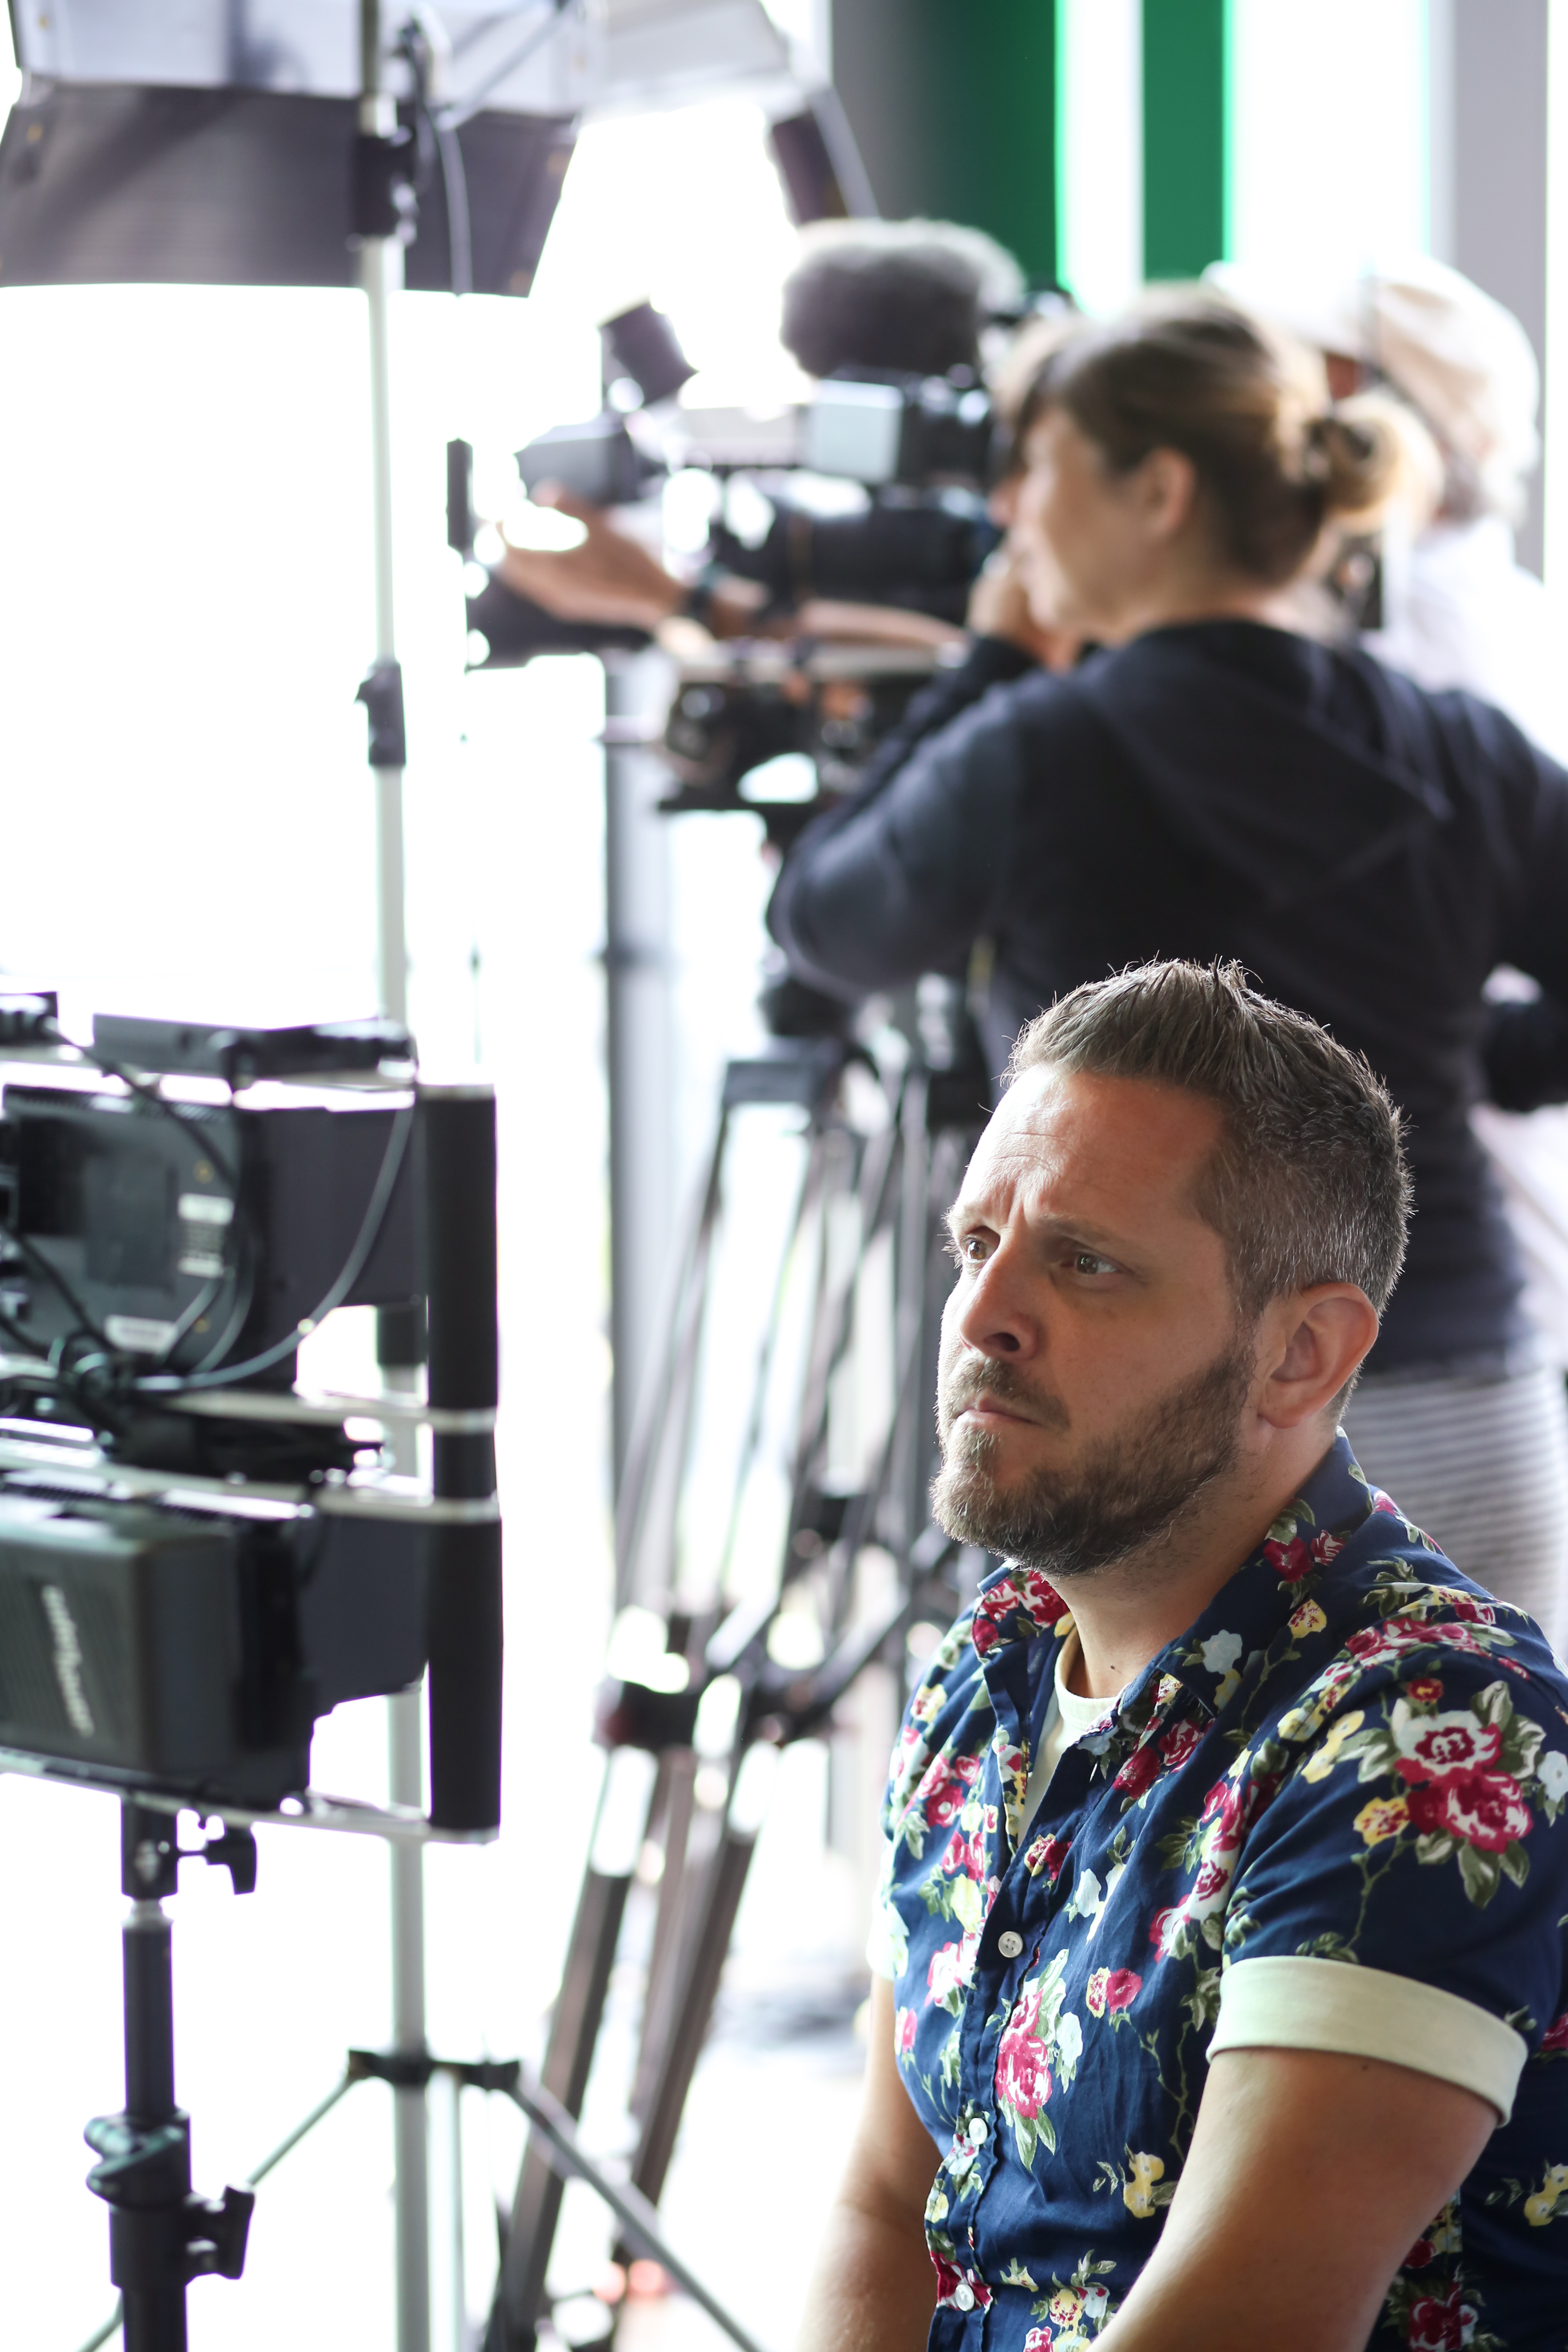 Director David Boisclair on the set of the documentary series PARENTS SOUS OBSERVATION (PARENTS UNDER OBSERVATION).